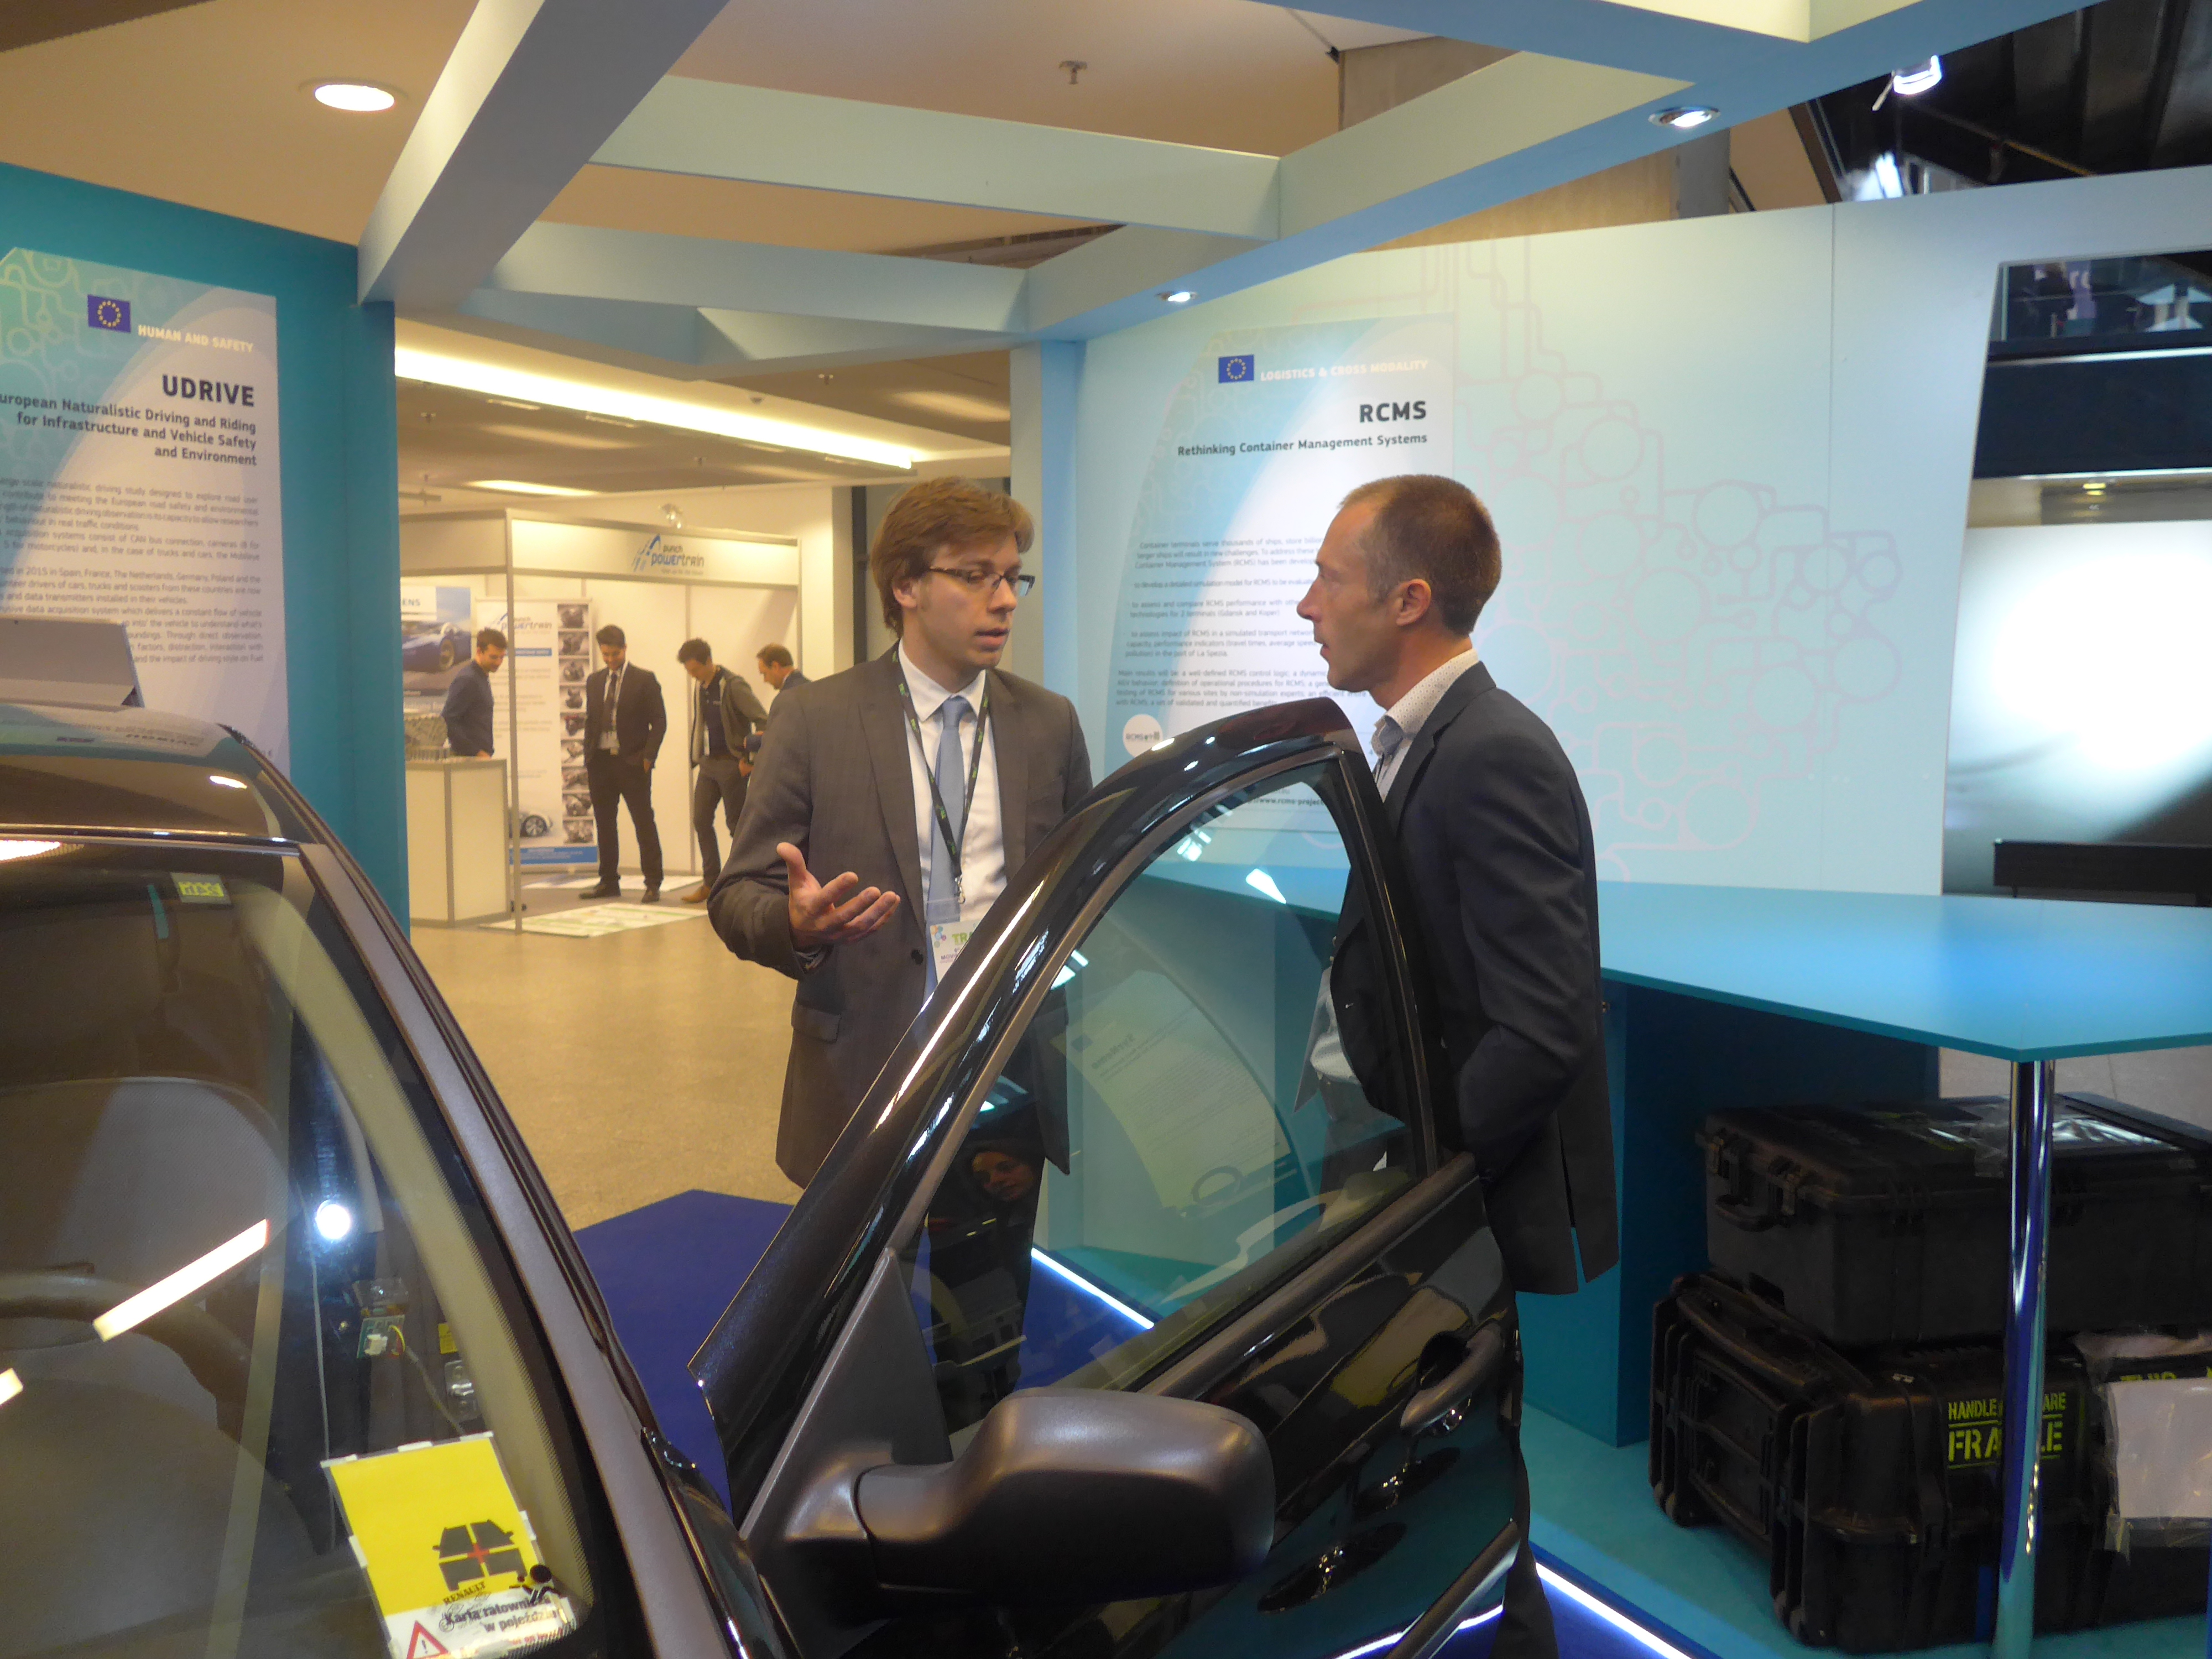 1st European Large-Scale Naturalistic Driving Study on Display at TRA2016